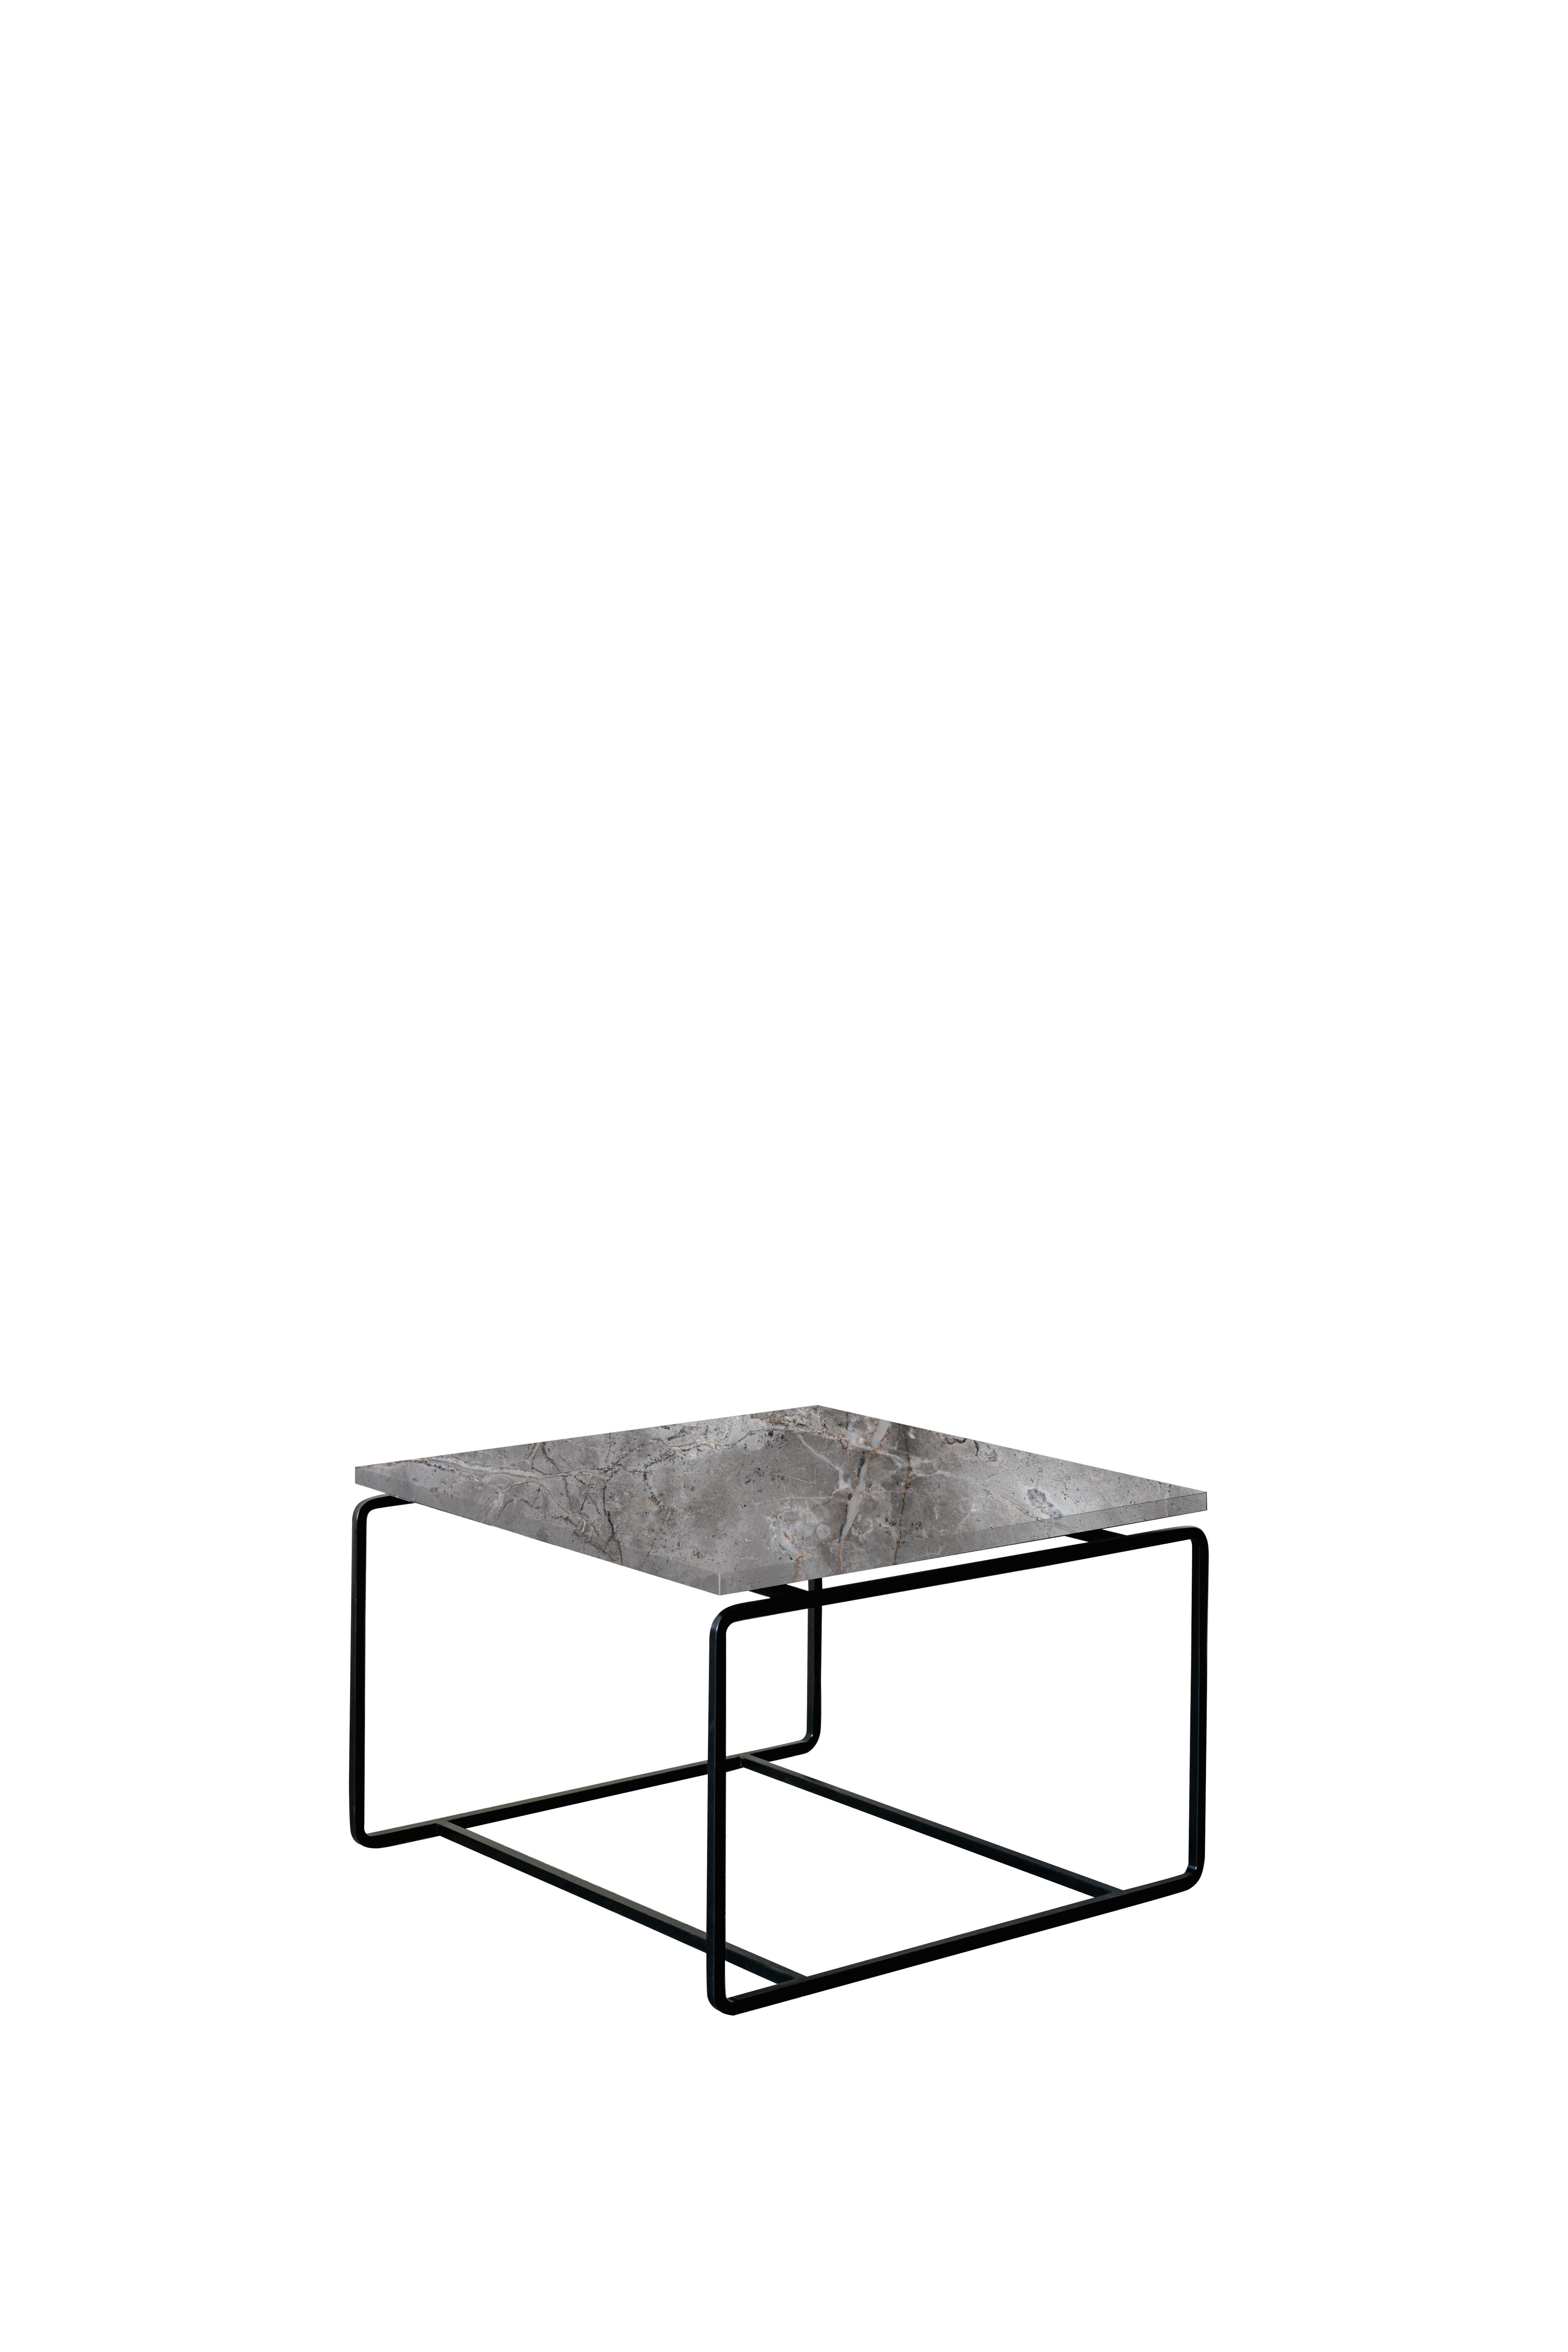 Fior di Bosco Form A coffee table by Un’common
Dimensions: W 60 x D 60 x H 37 cm
Materials: Marble
Also available: Other finishes available

FORM is about giving fresh look by rounded corners and lifted marble tops. Every detail matters. In